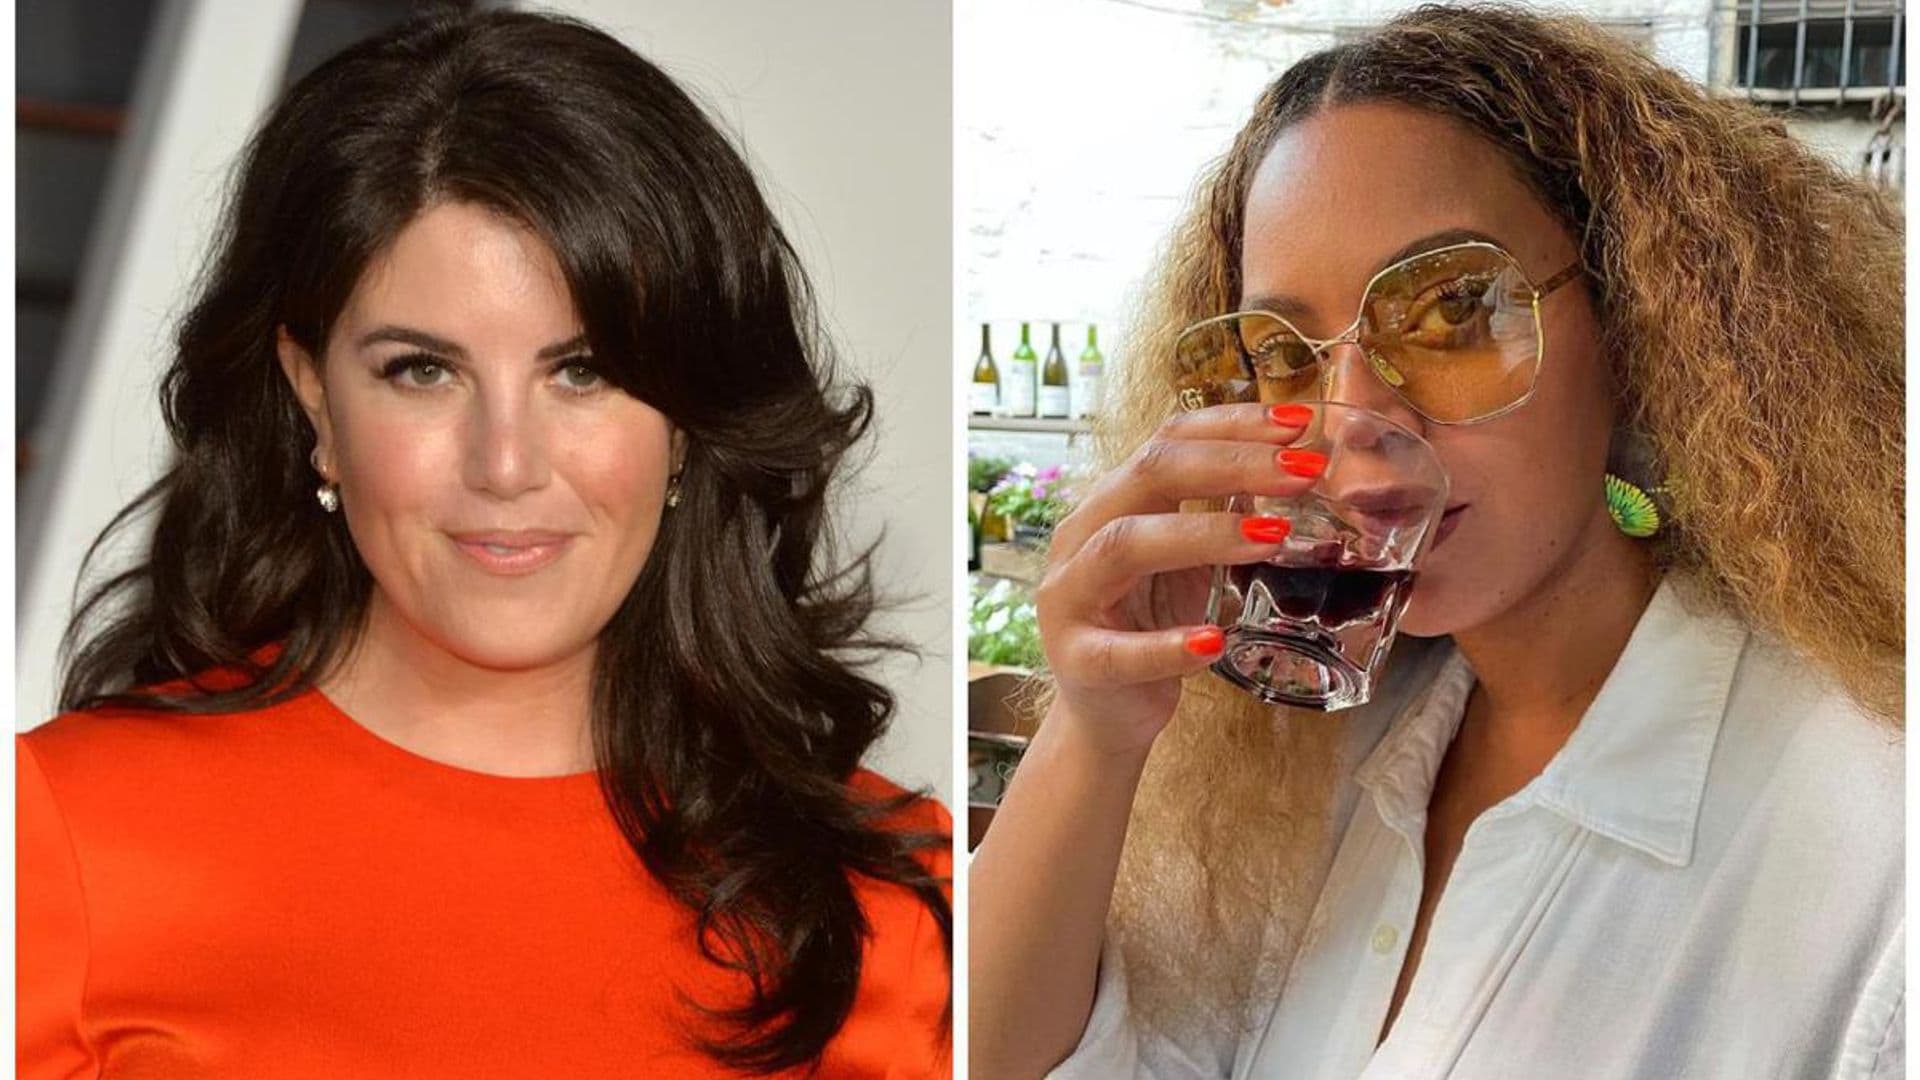 Monica Lewinsky asks Beyonce to consider removing her name from her 2013 song 'Partition'